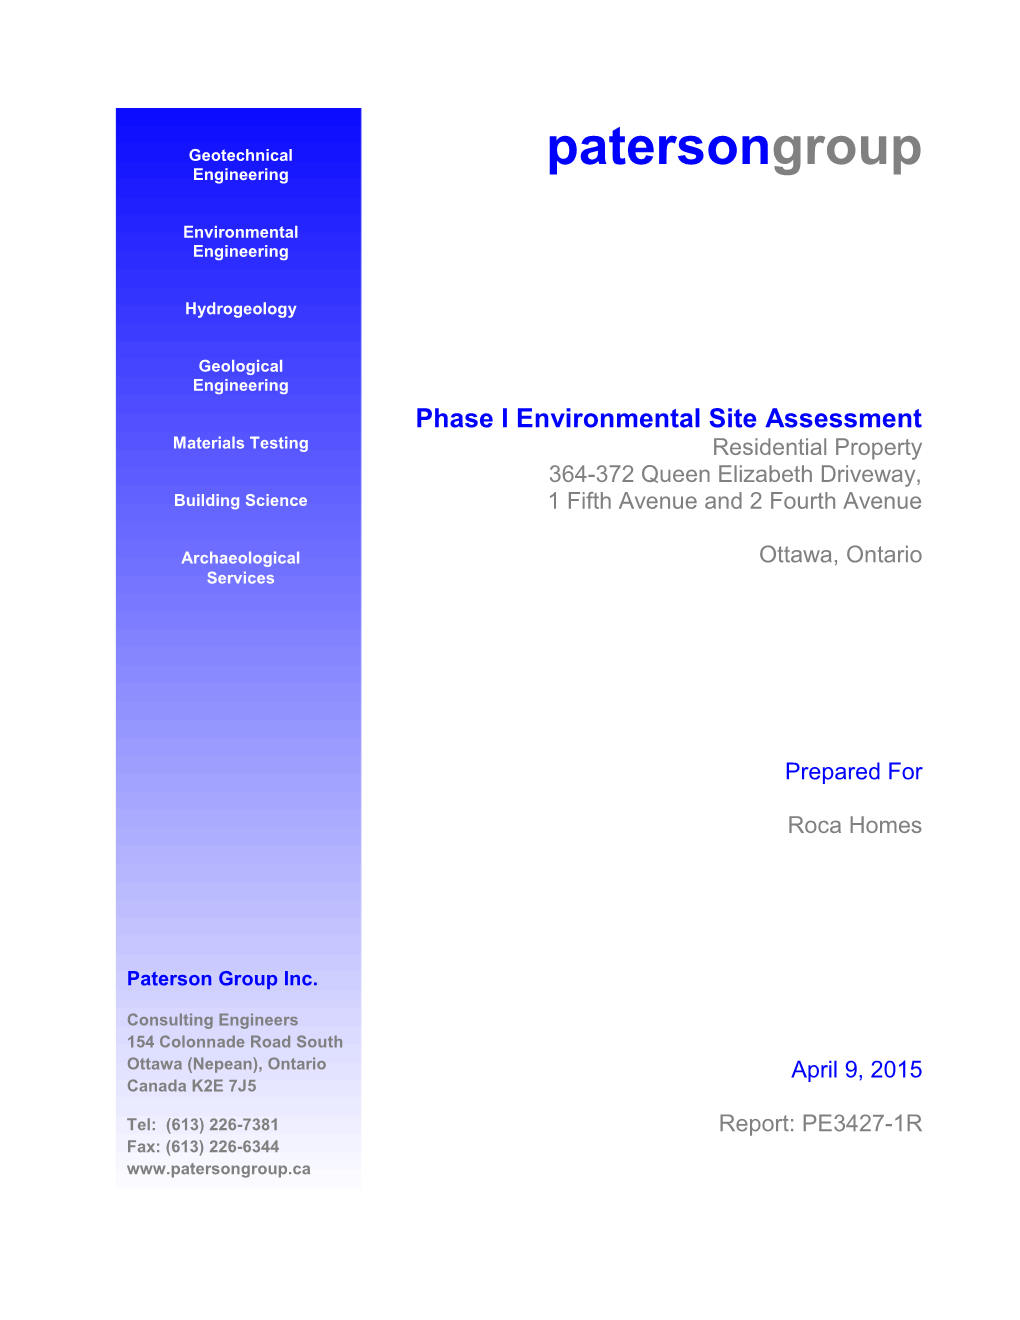 Phase I Environmental Site Assessment Materials Testing Residential Property